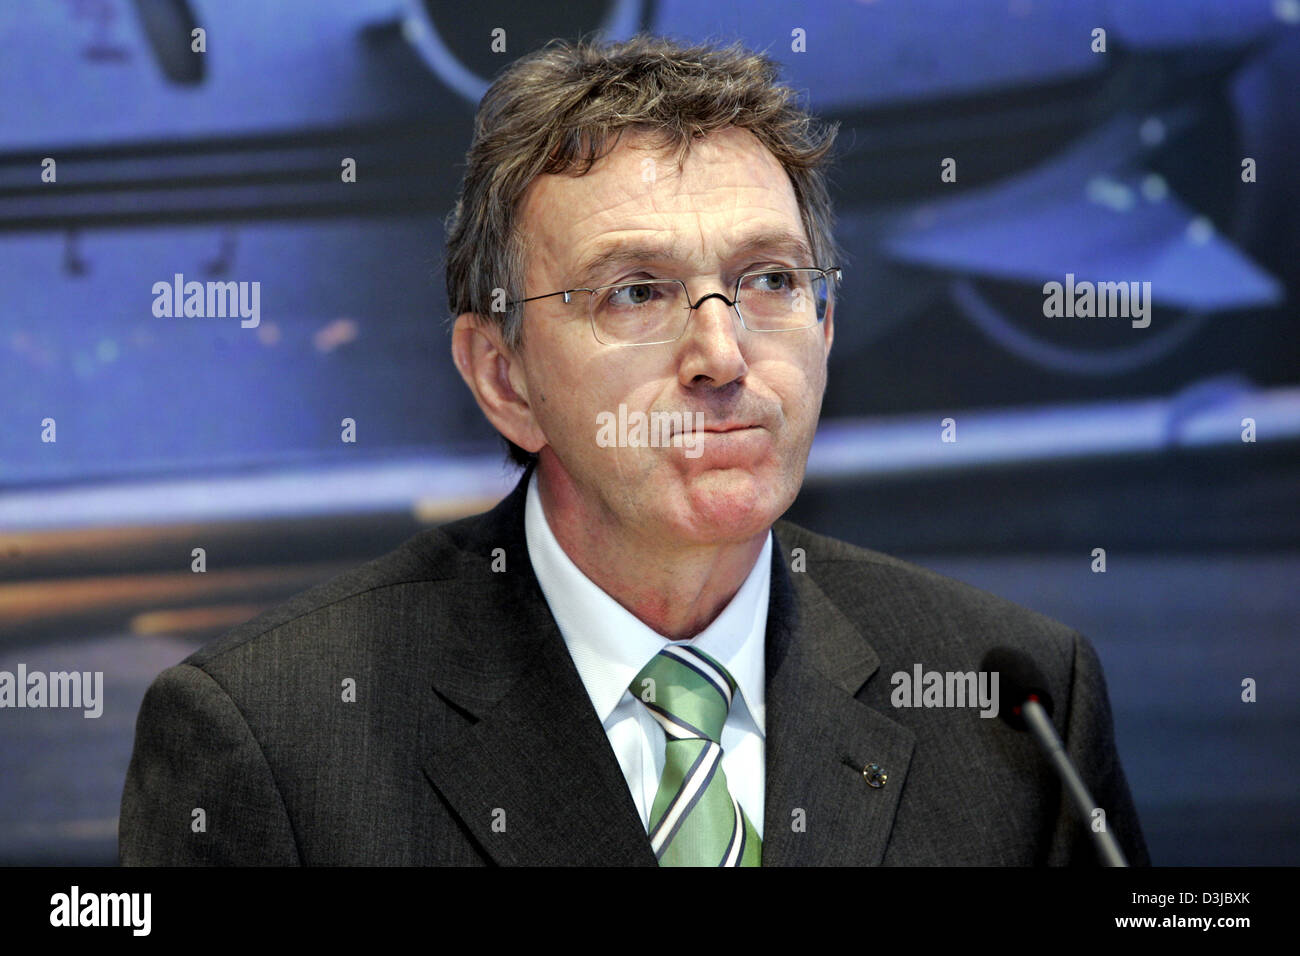 (dpa) - Wolfgang Mayrhuber, Chairman of Deutsche Lufthansa AG, pictured during a press conference in Munich, Germany, 09 March 2005. Stock Photo